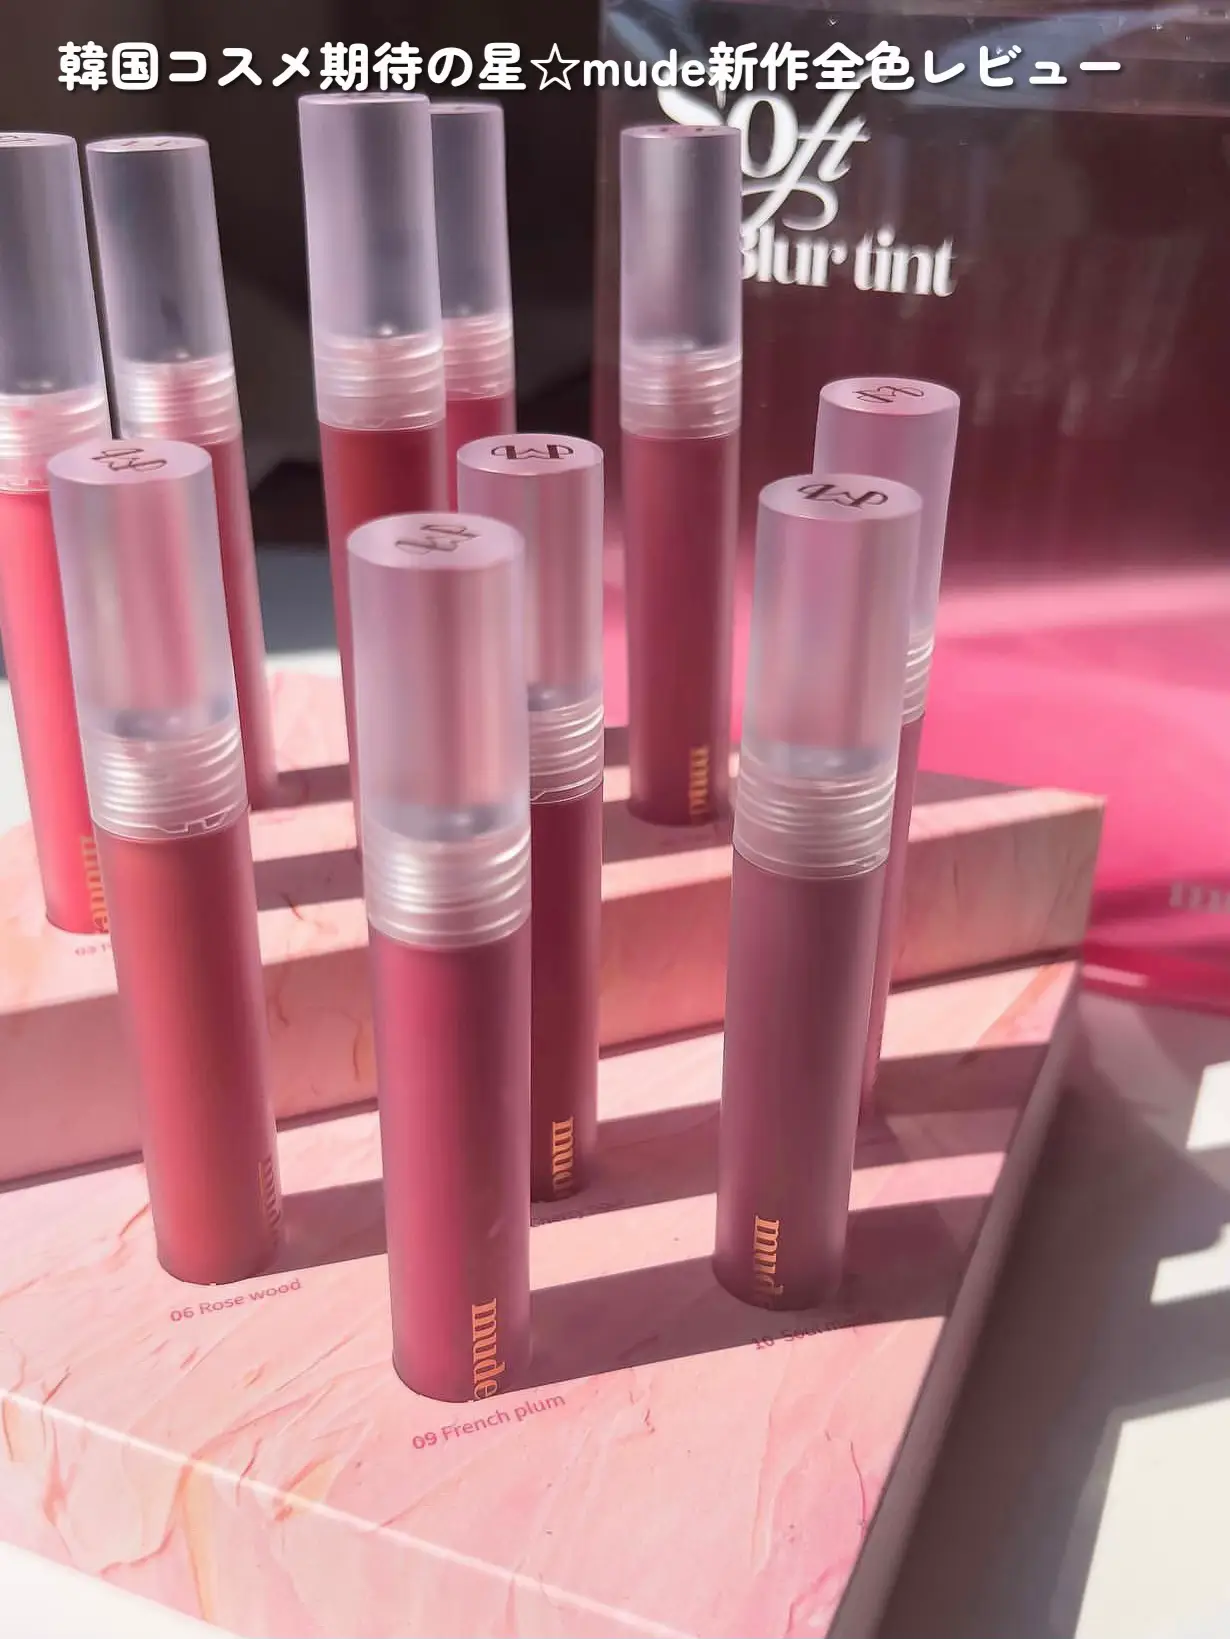 mude new work] too fashionable matte tint all colors review